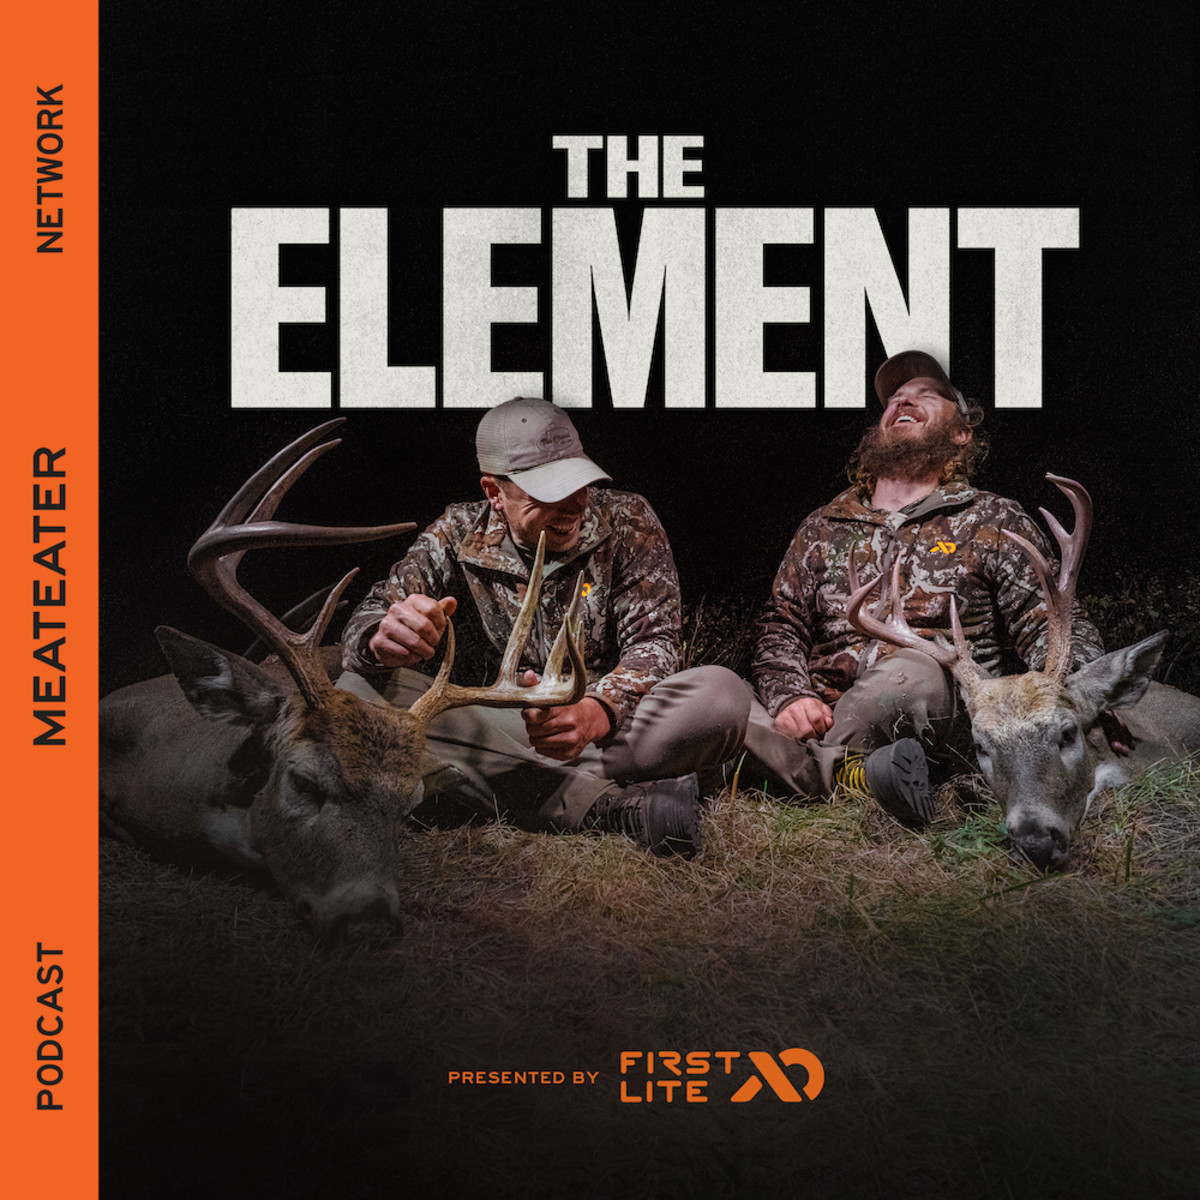 E269: Hill Country Axis Bow Hunting (History of Exotics, Axis Deer Strategy, High Fences vs. Low Fences, Native vs. Non-Native)